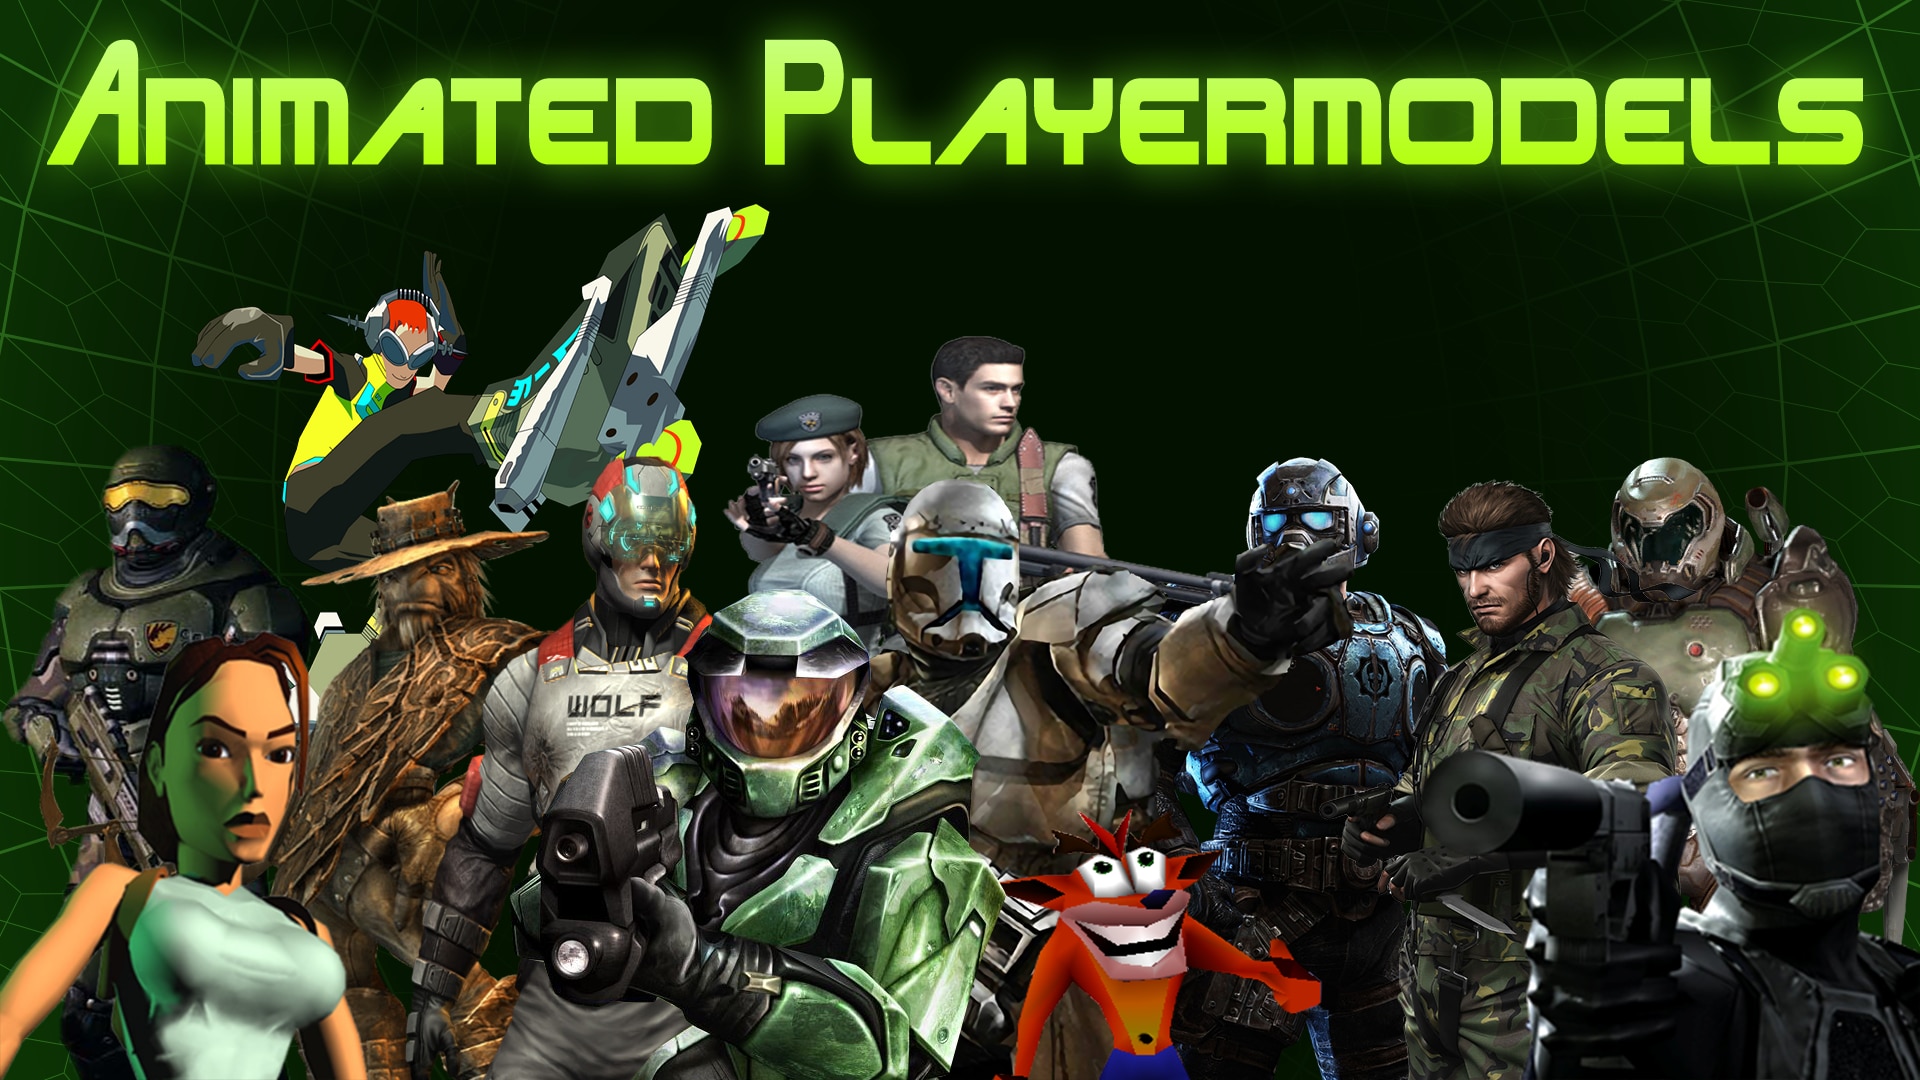 I HAVE MADE A GMOD PLAYERMODEL! :D by AwesomeIsaiah on DeviantArt